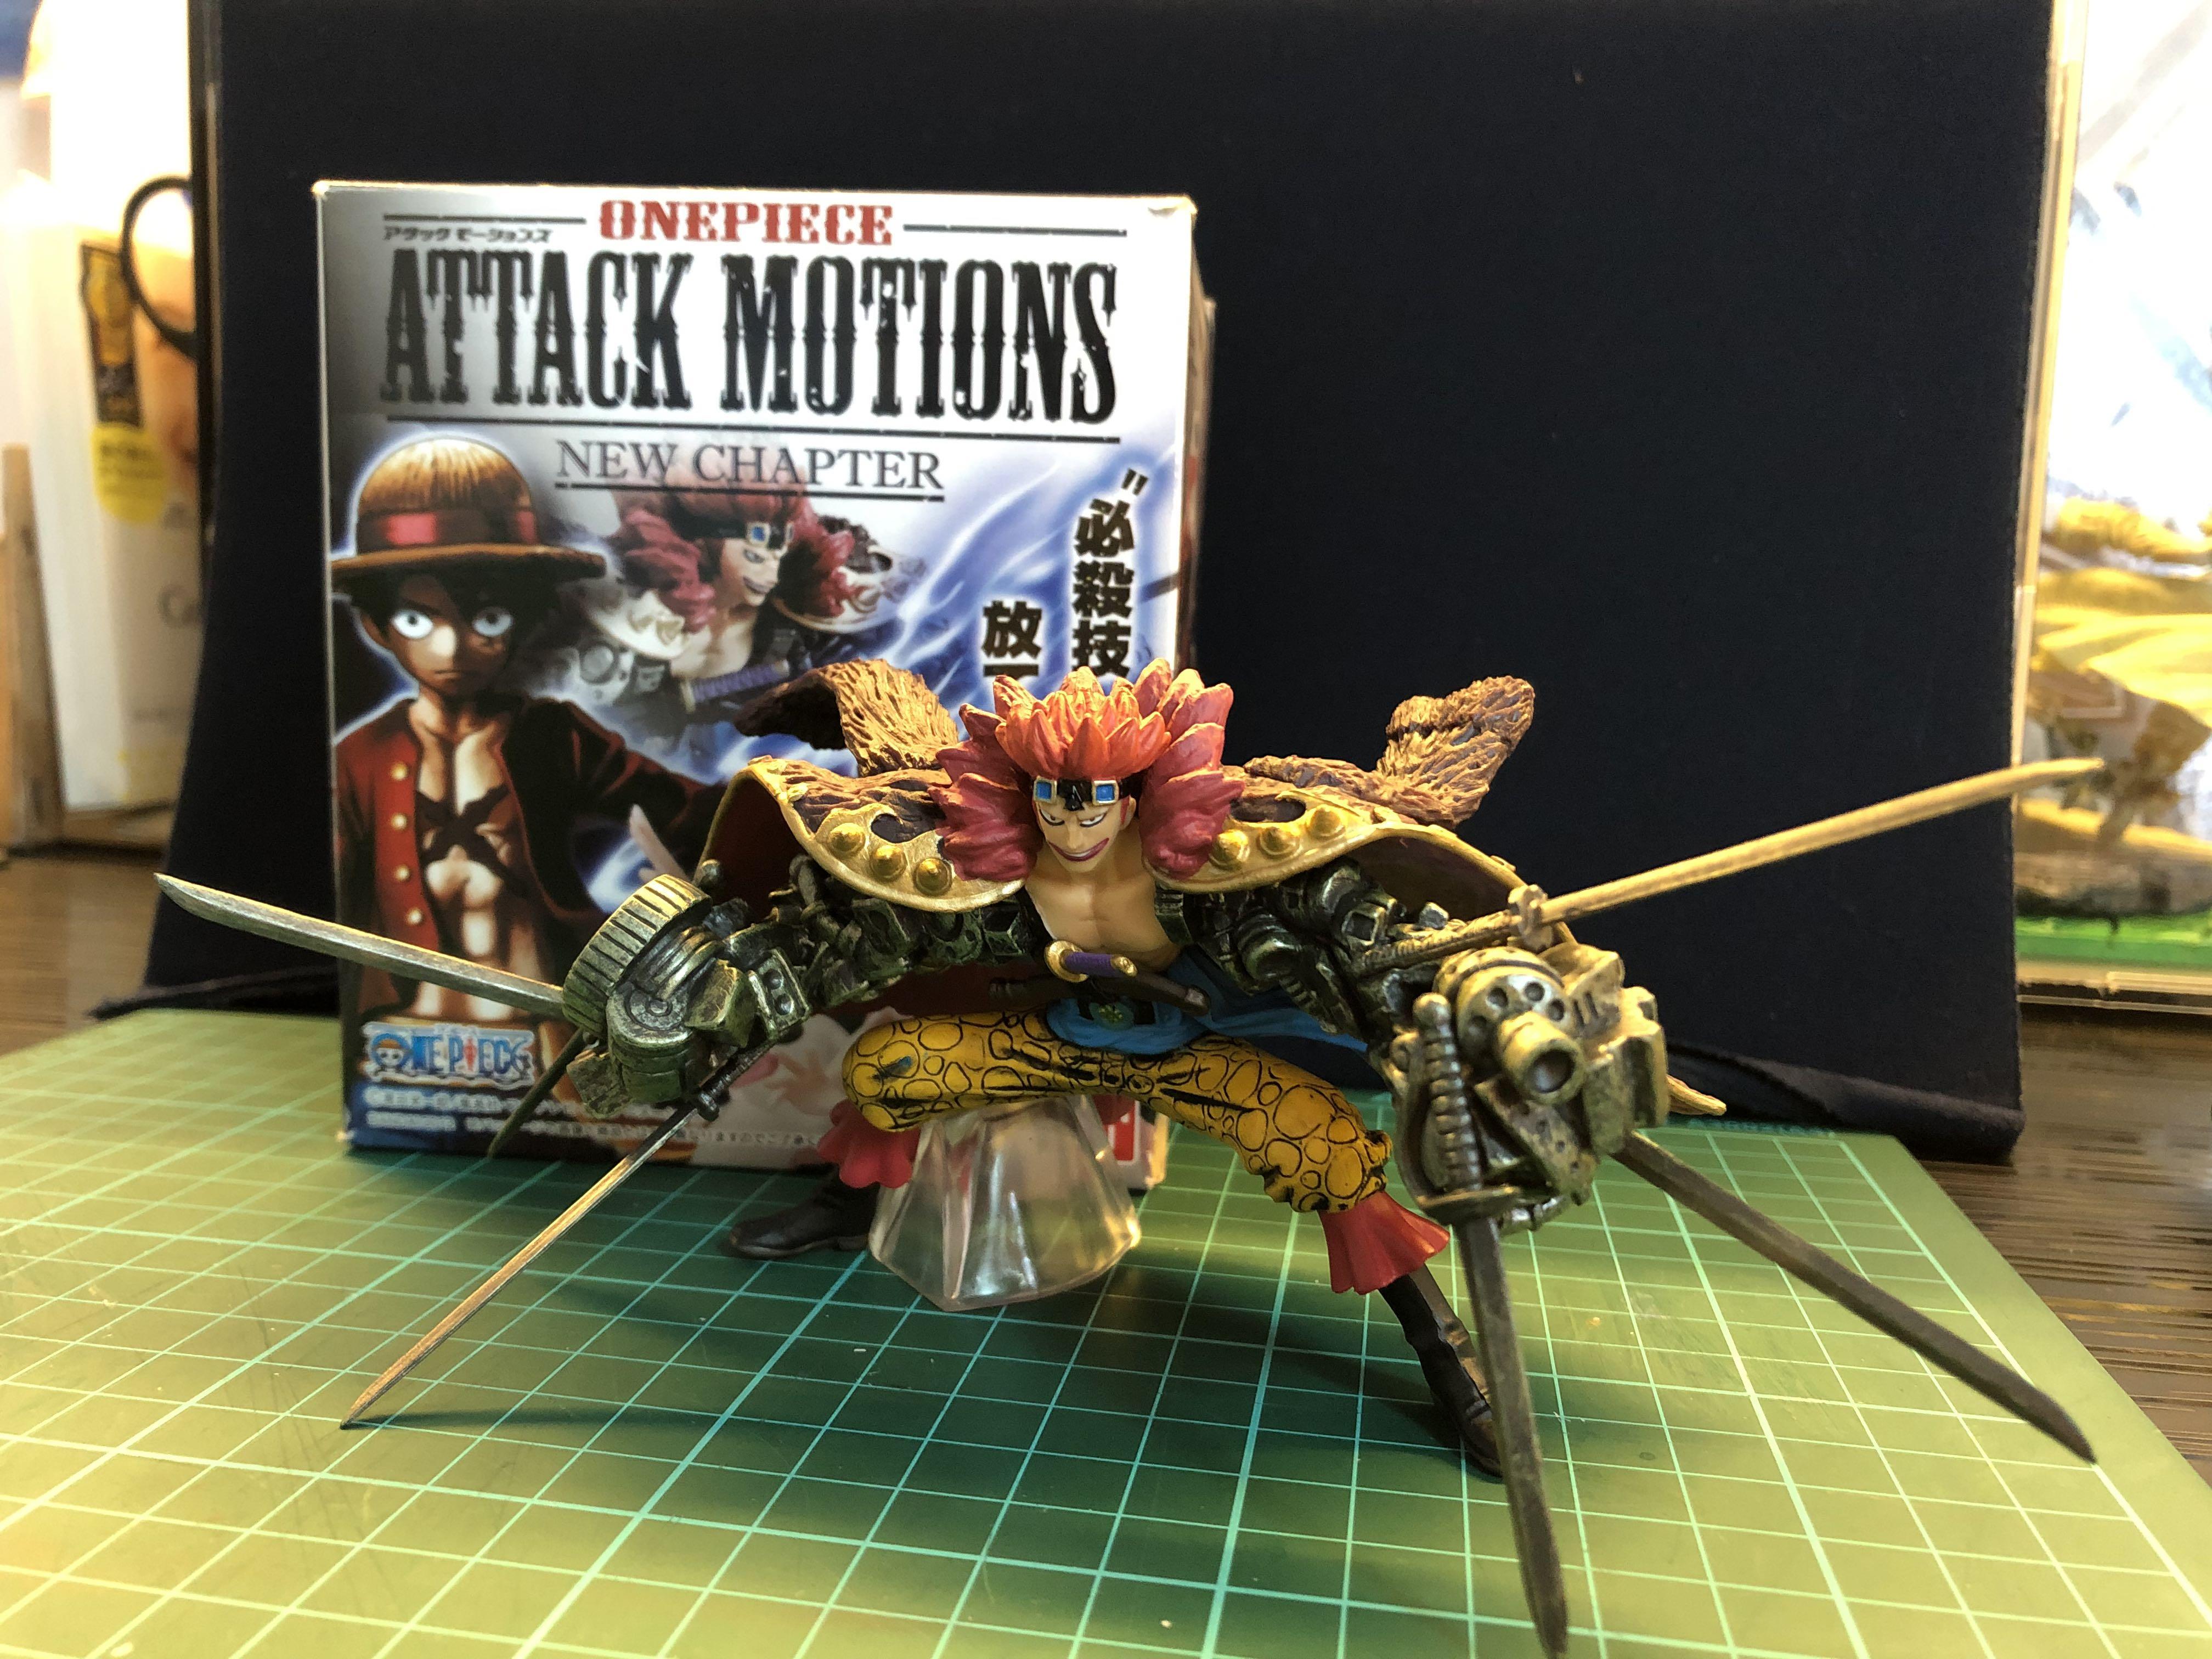 Bandai Attack Motion One Piece New Chapter Eustaats Kid 海贼王 航海王 必杀技 基德 超新星 Toys Games Action Figures Collectibles On Carousell